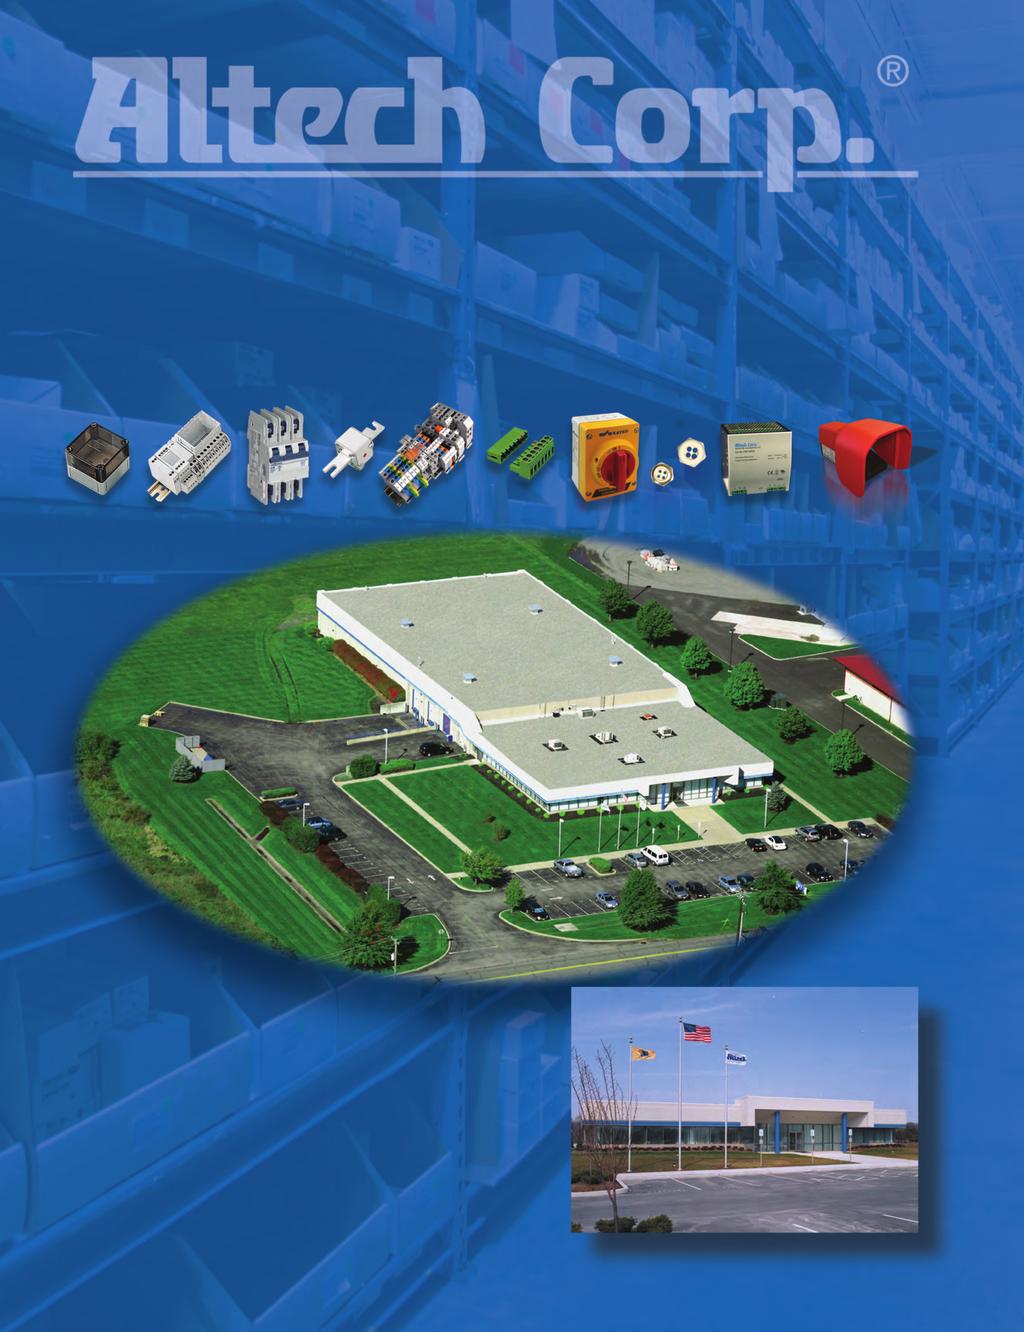 Since 984, Altech Corporation has grown to become a leading supplier of automation and industrial control components.